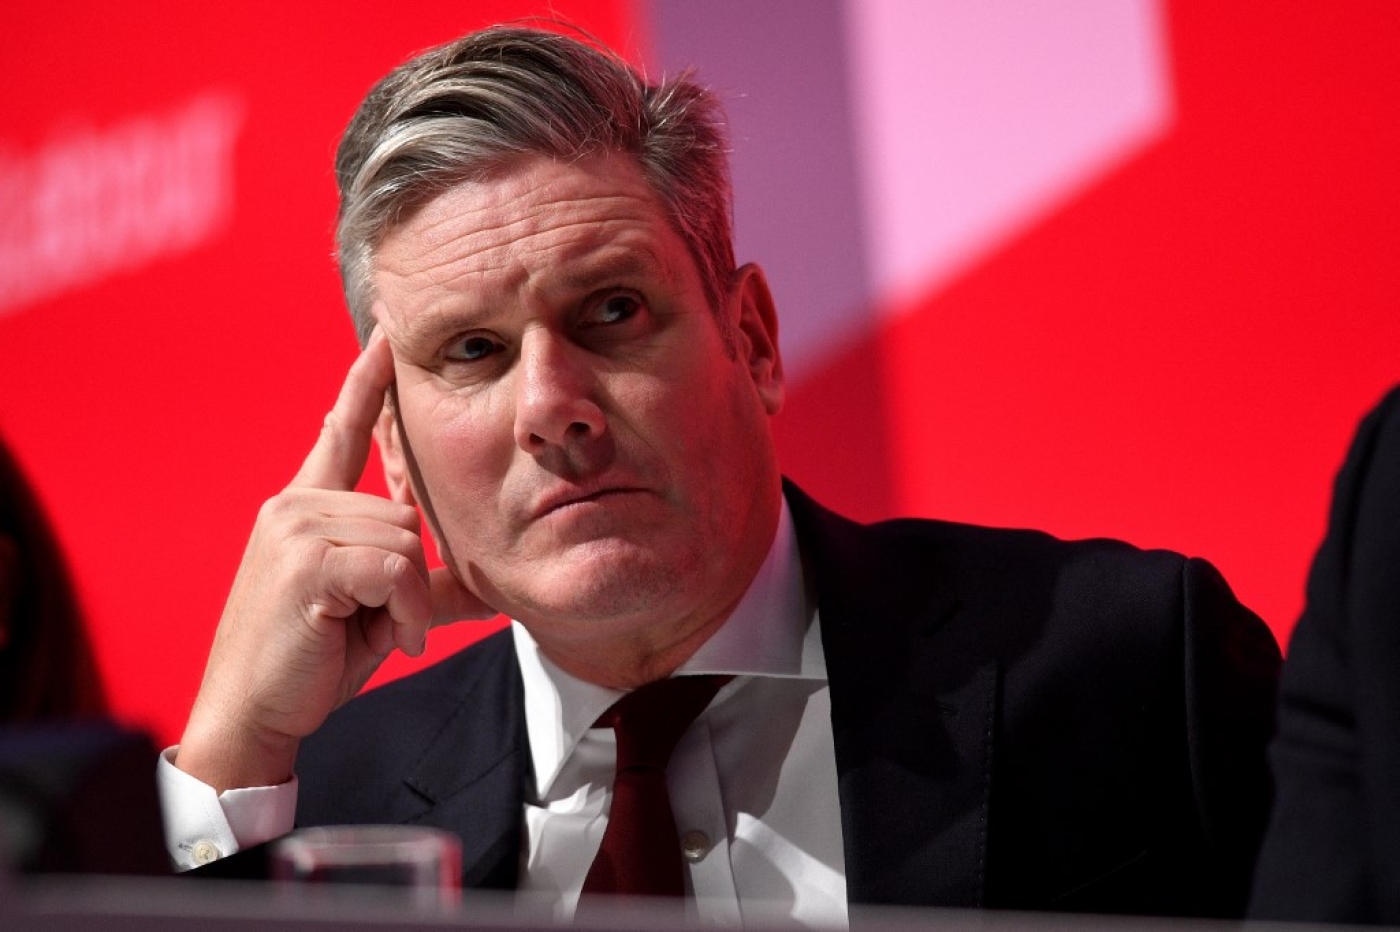 British Labour leader Keir Starmer is pictured at the party’s conference in Liverpool on 27 September 2022 (AFP)